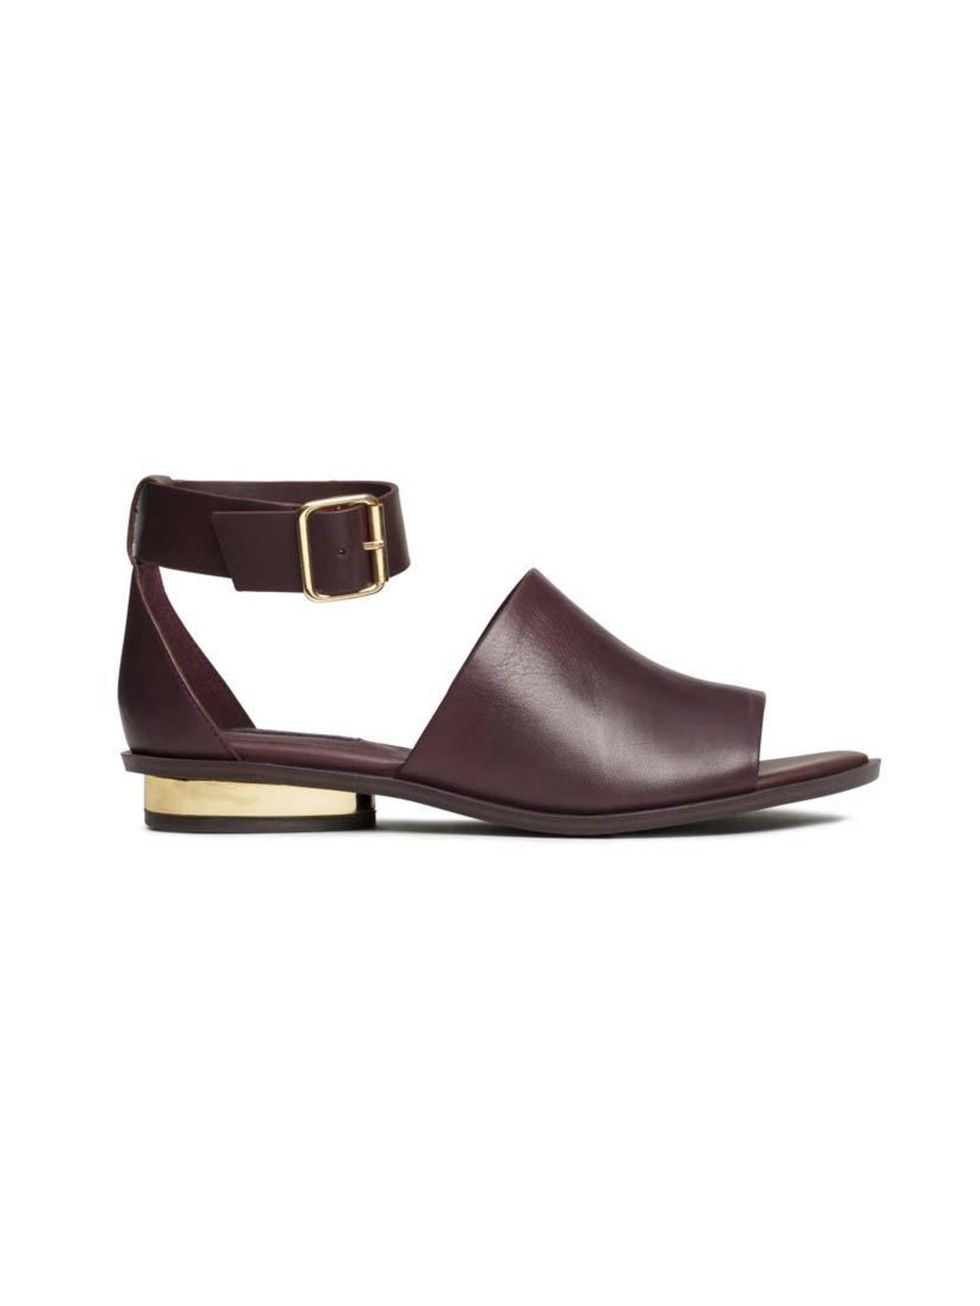 <p>Senior Fashion Editor Michelle Duguid snapped up these leather sandals.</p>

<p><a href="http://www.hm.com/gb/product/92403?article=92403-A" target="_blank">H&M</a> sandals, £39.99</p>